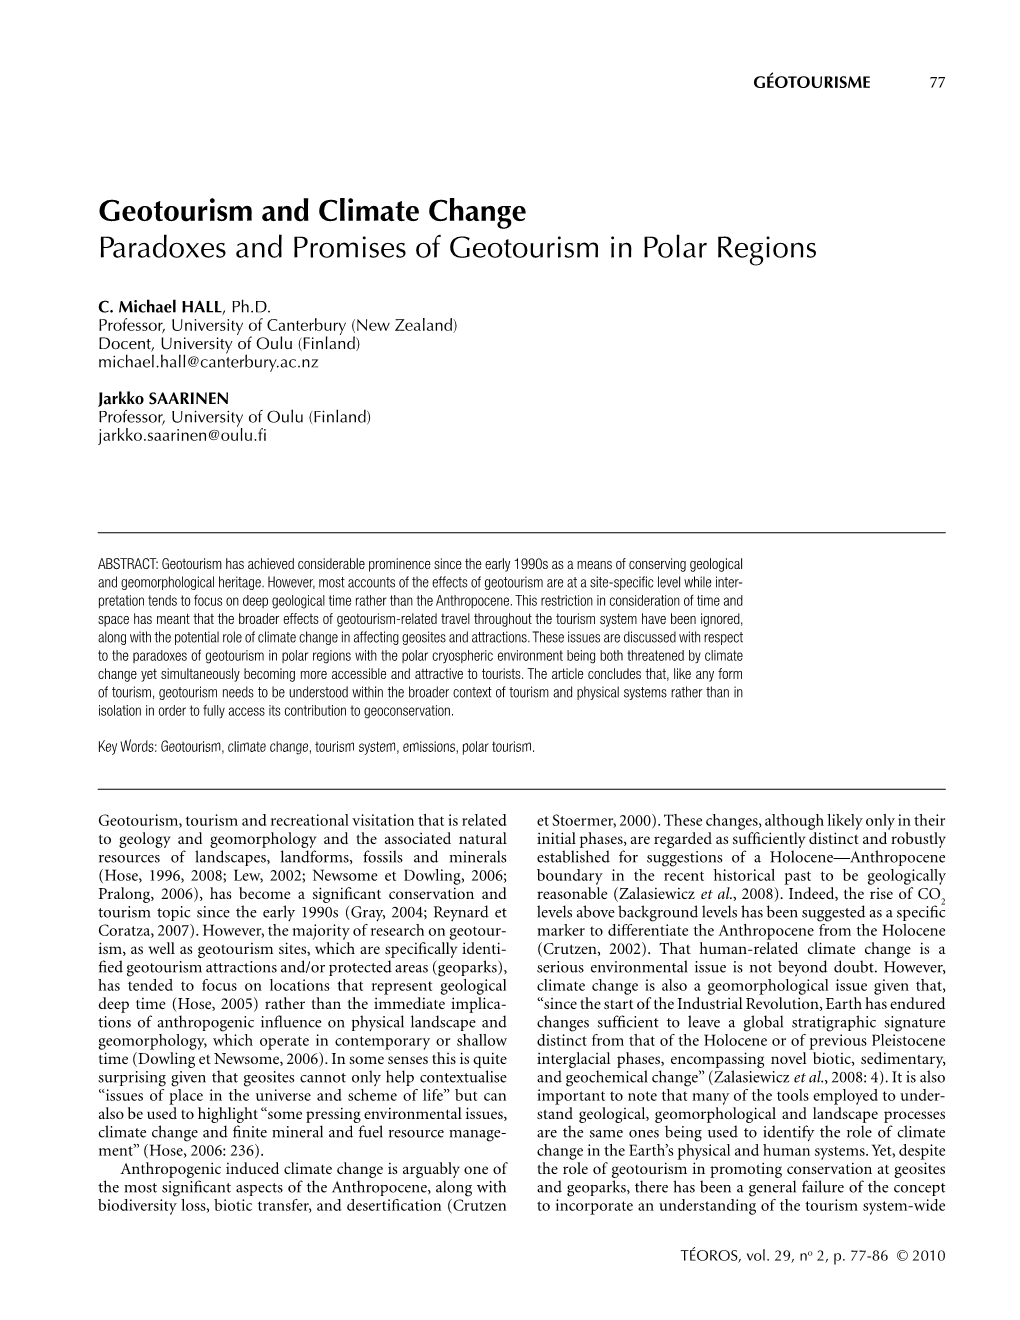 Geotourism and Climate Change Paradoxes and Promises of Geotourism in Polar Regions